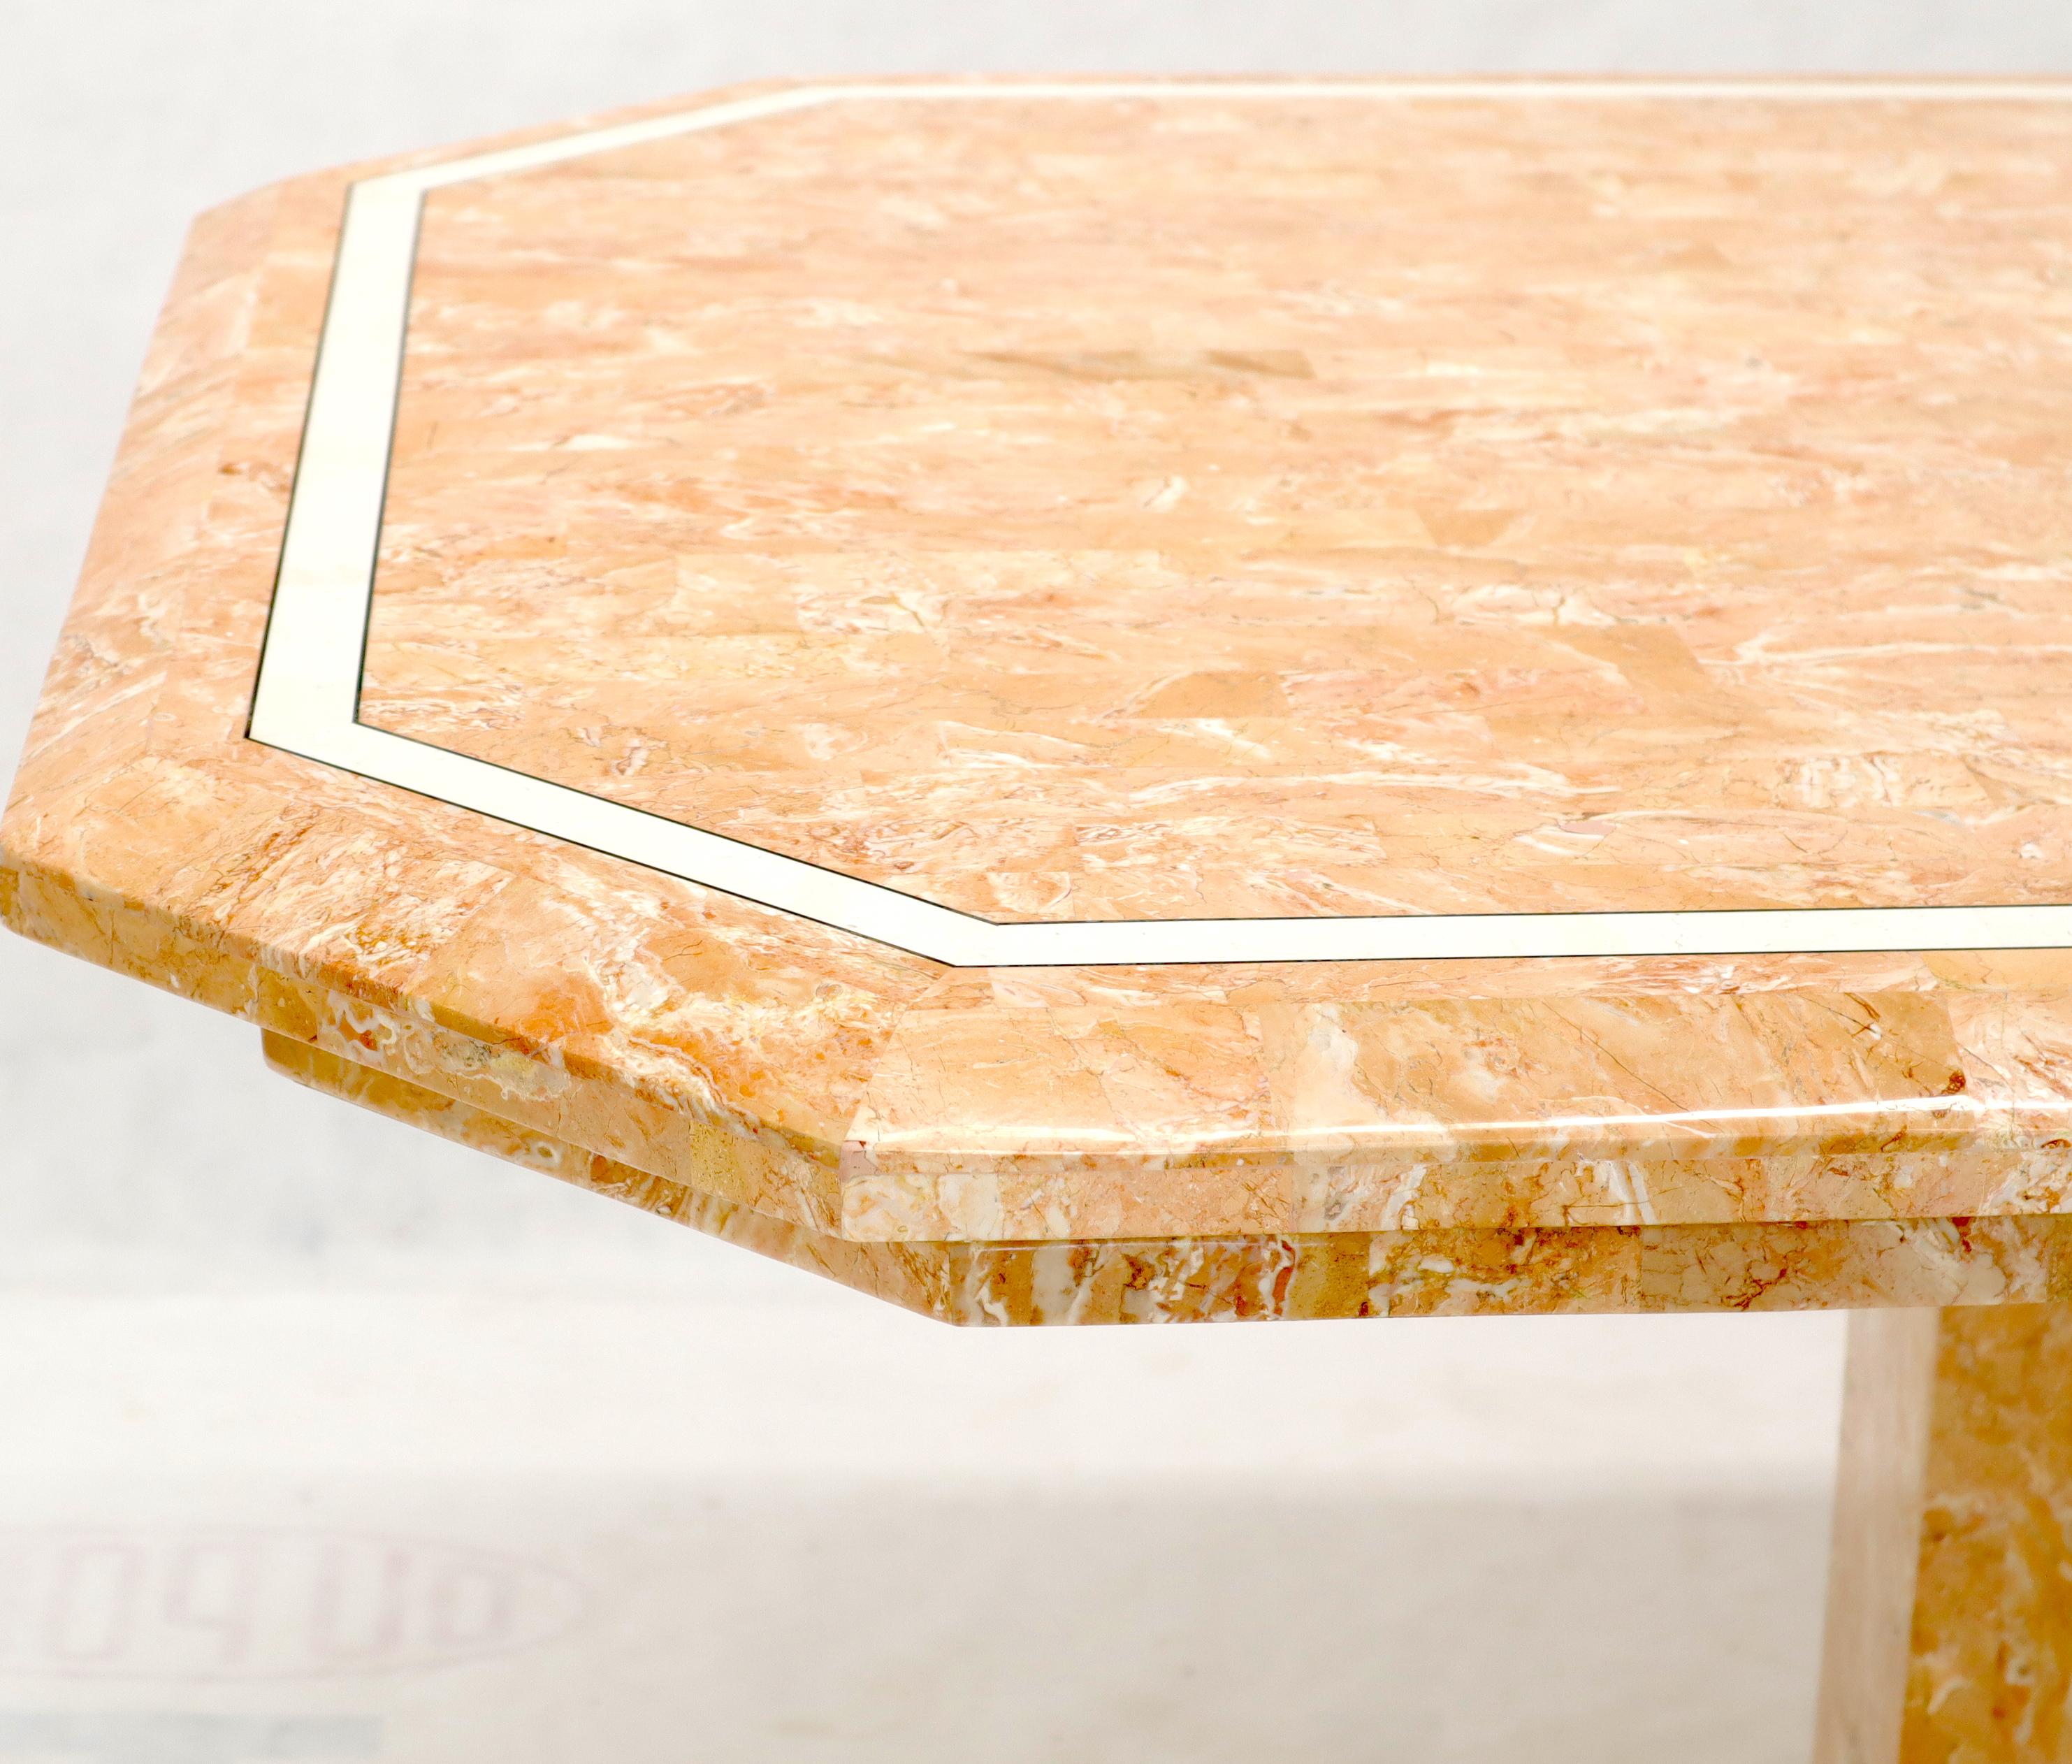 Unknown Tessellated Red & White Marble Tile Single Pedestal Rectangular Dining Table For Sale